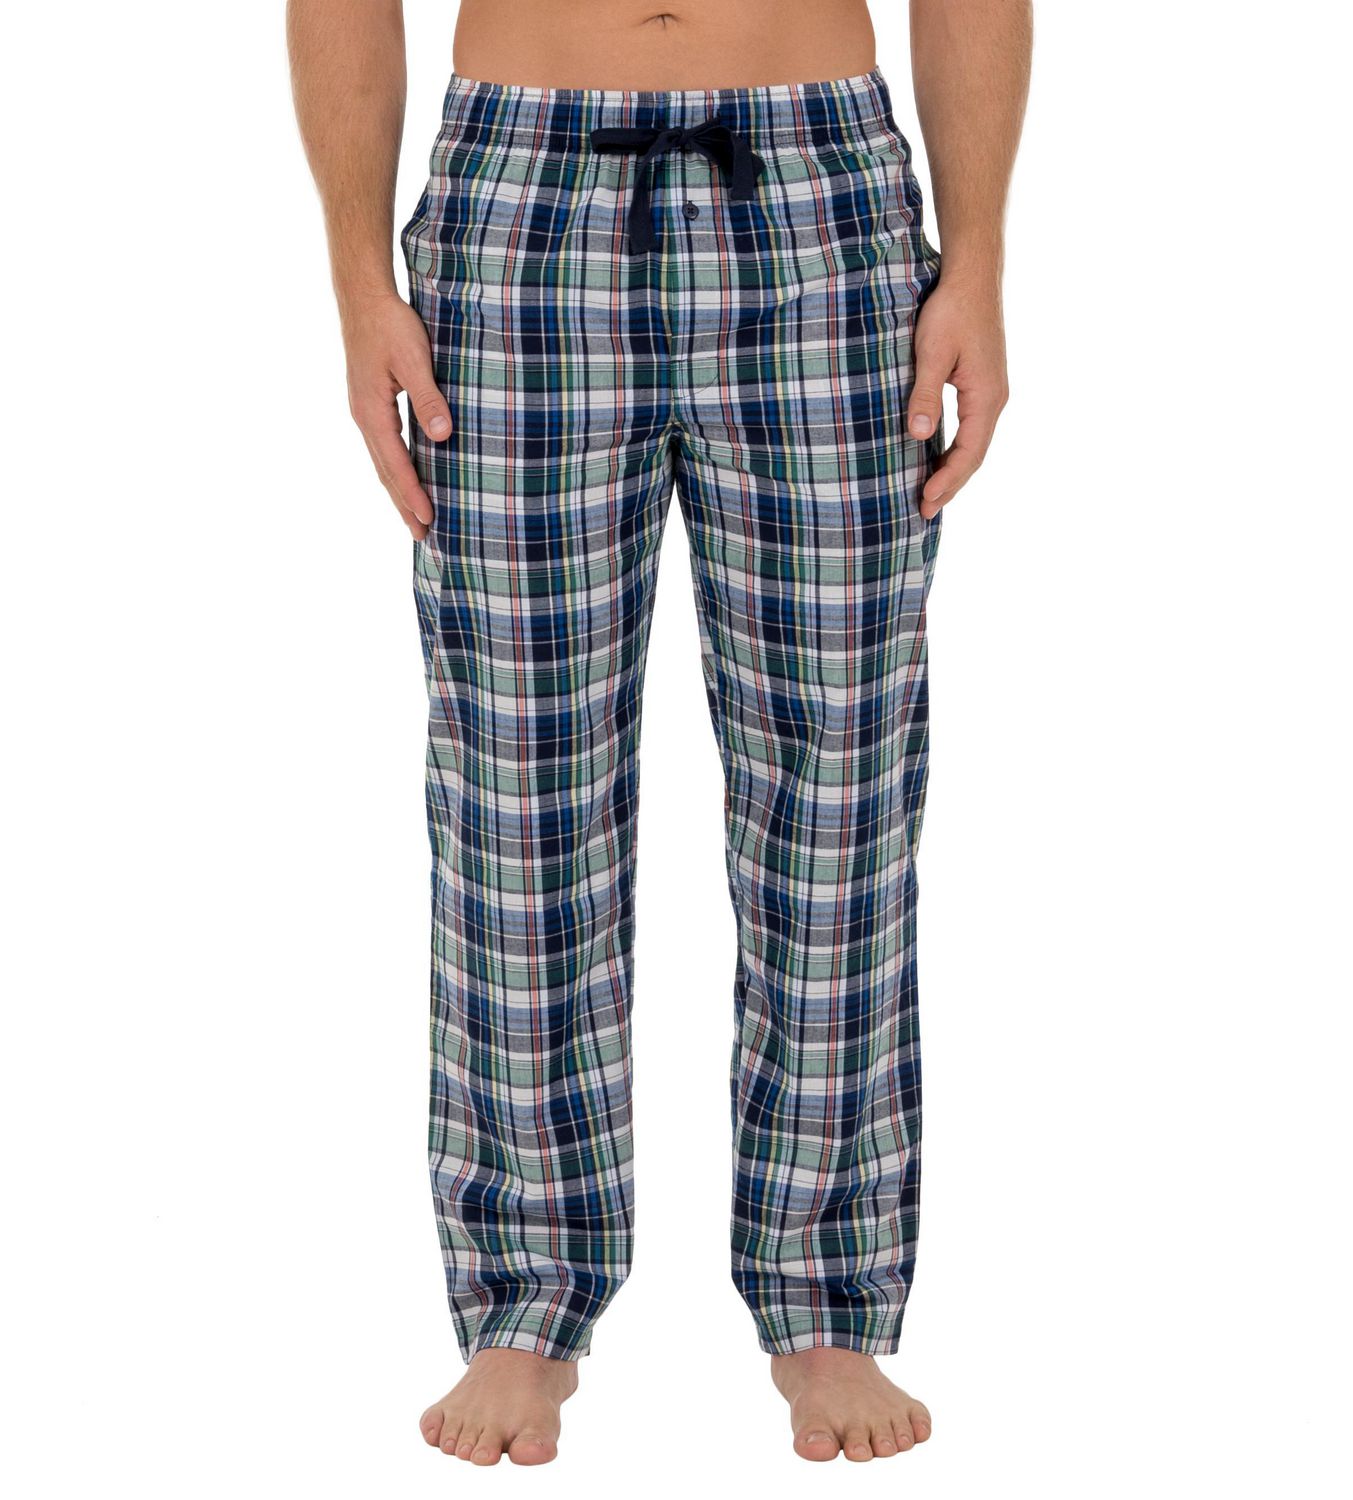 Fruit of the Loom Men's Microsanded Woven Plaid Pajama Pant Multicolour ...